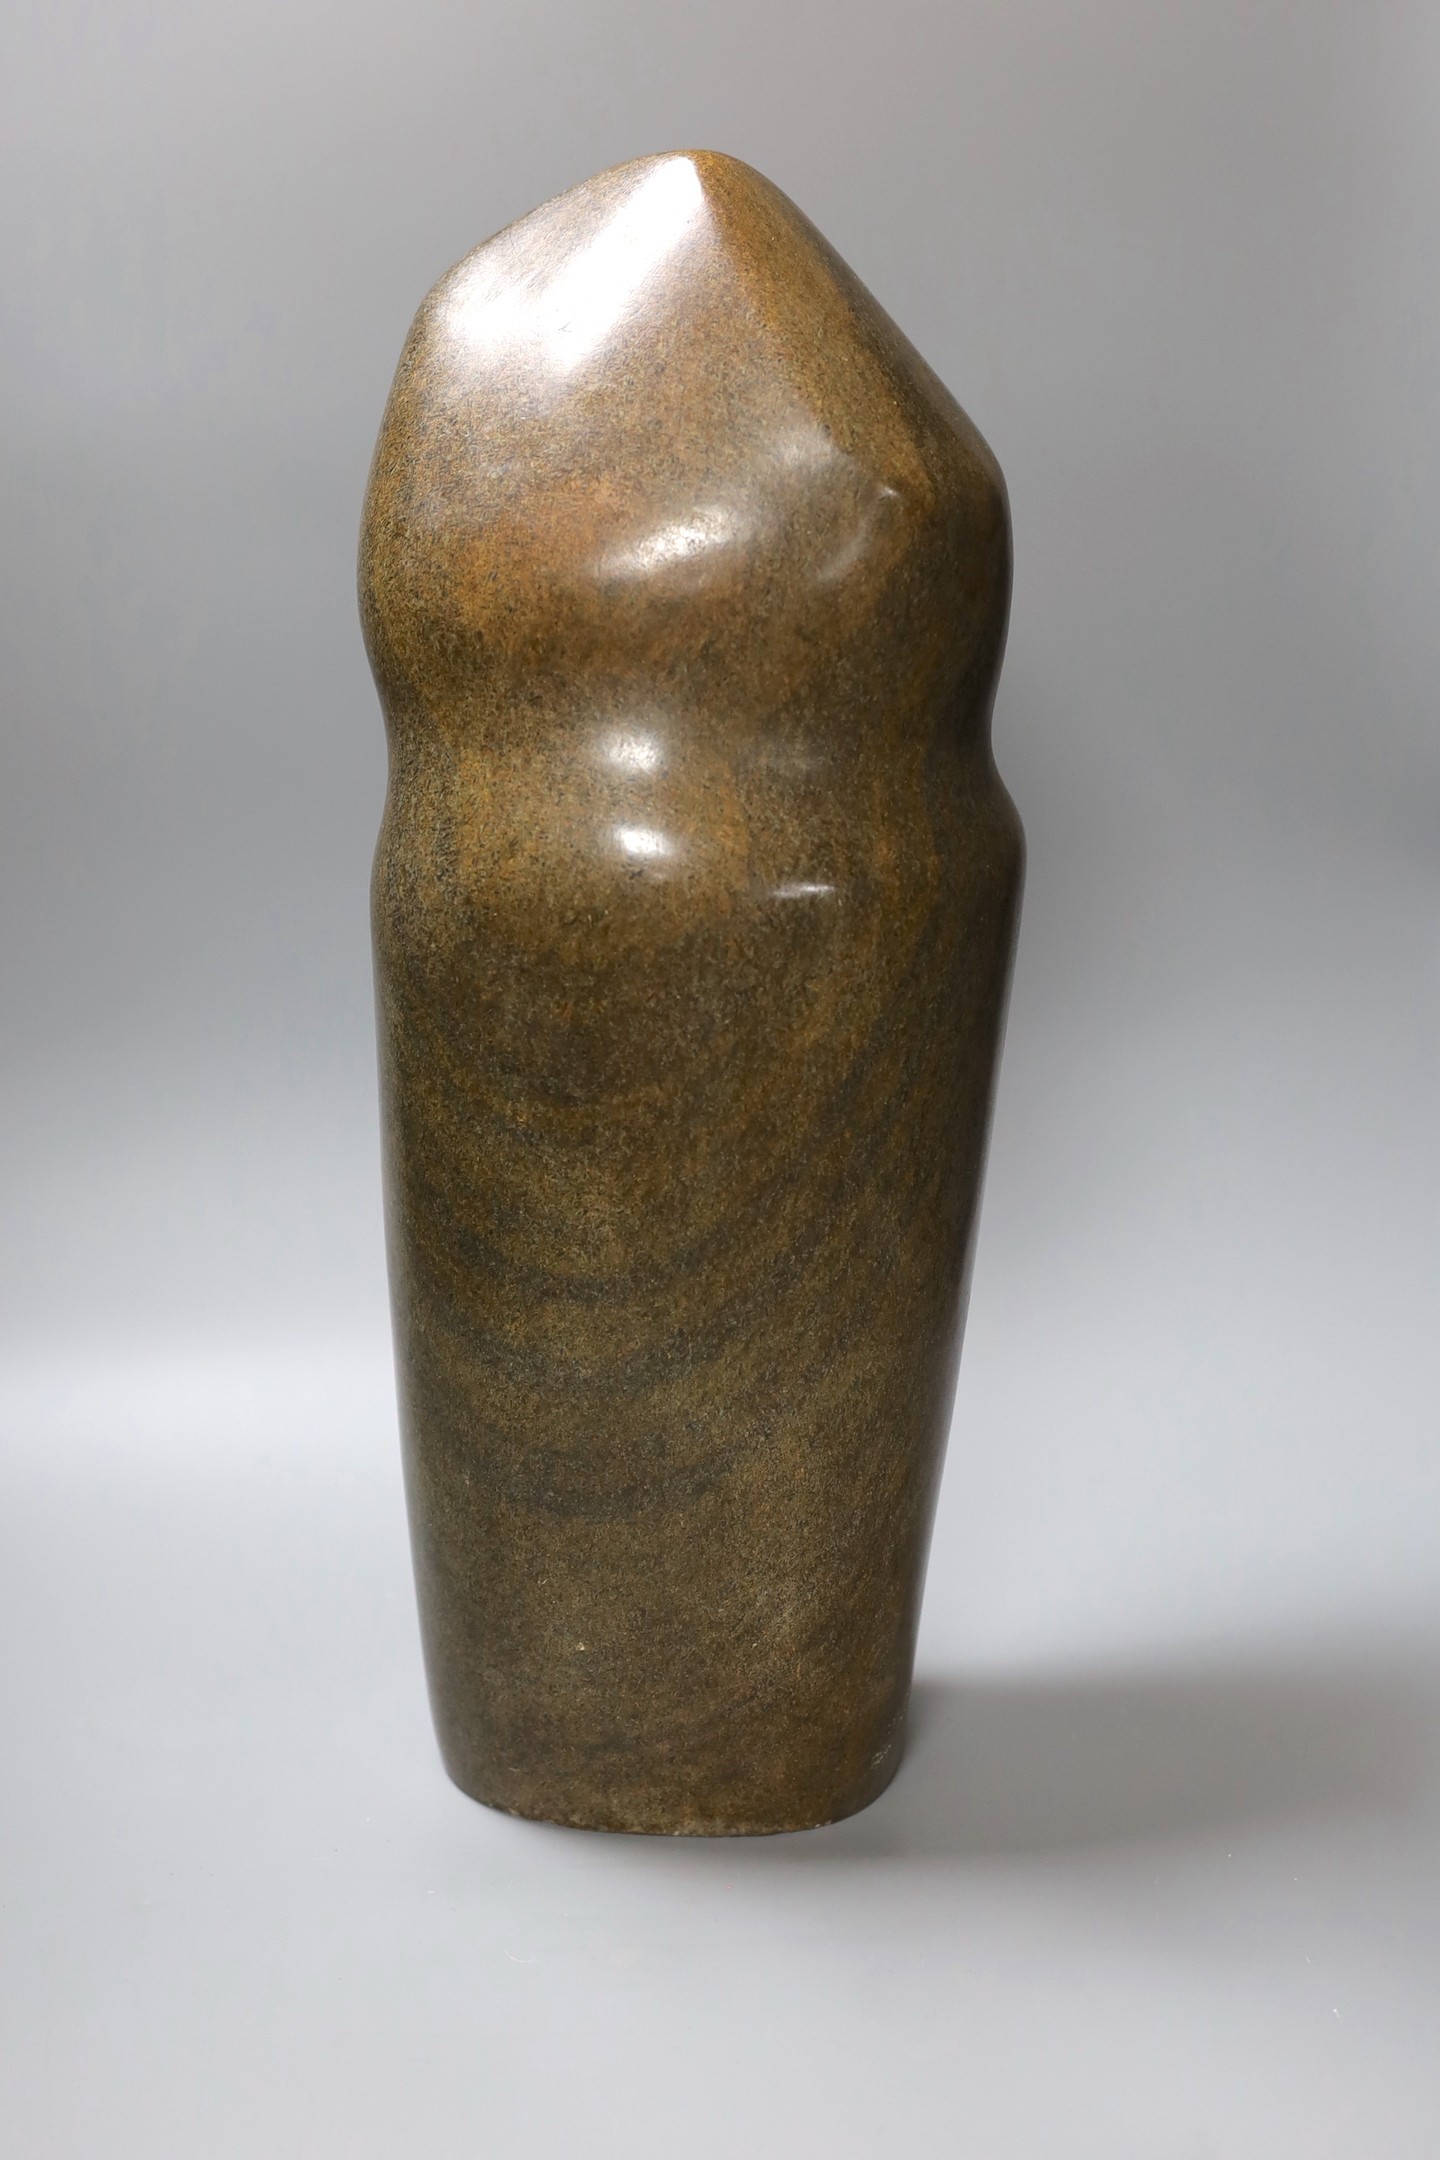 A Zimbabwean carved and polished stone slender abstract figure, 48cm tall